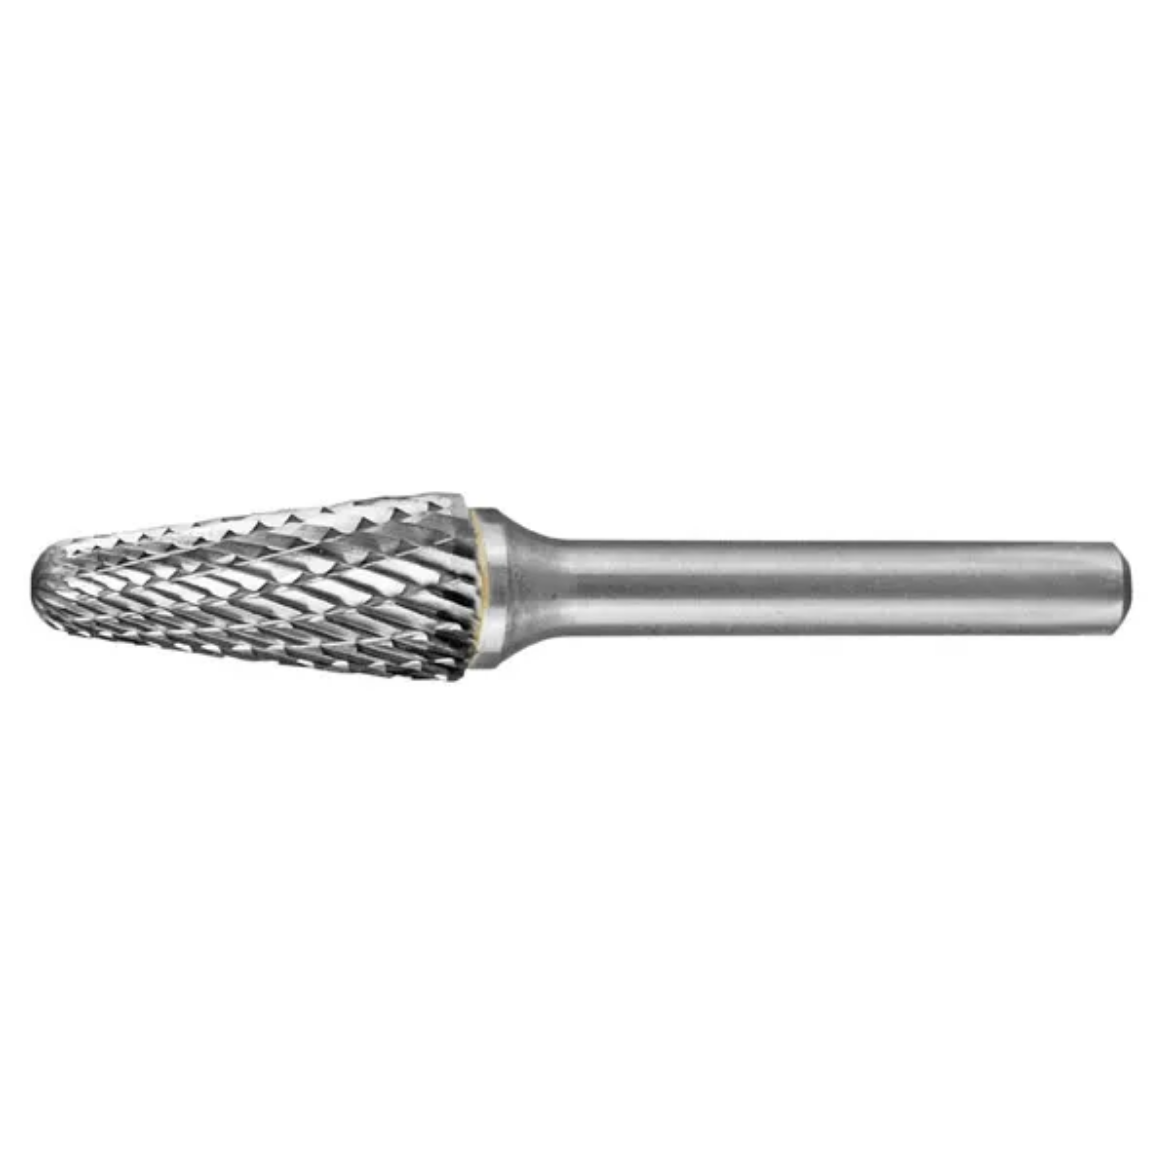 Picture of HOLEMAKER CARBIDE BURR, TAPERED RADIUS END, 1/2" X 1-1/8" HEAD, 1/4" SHANK DC